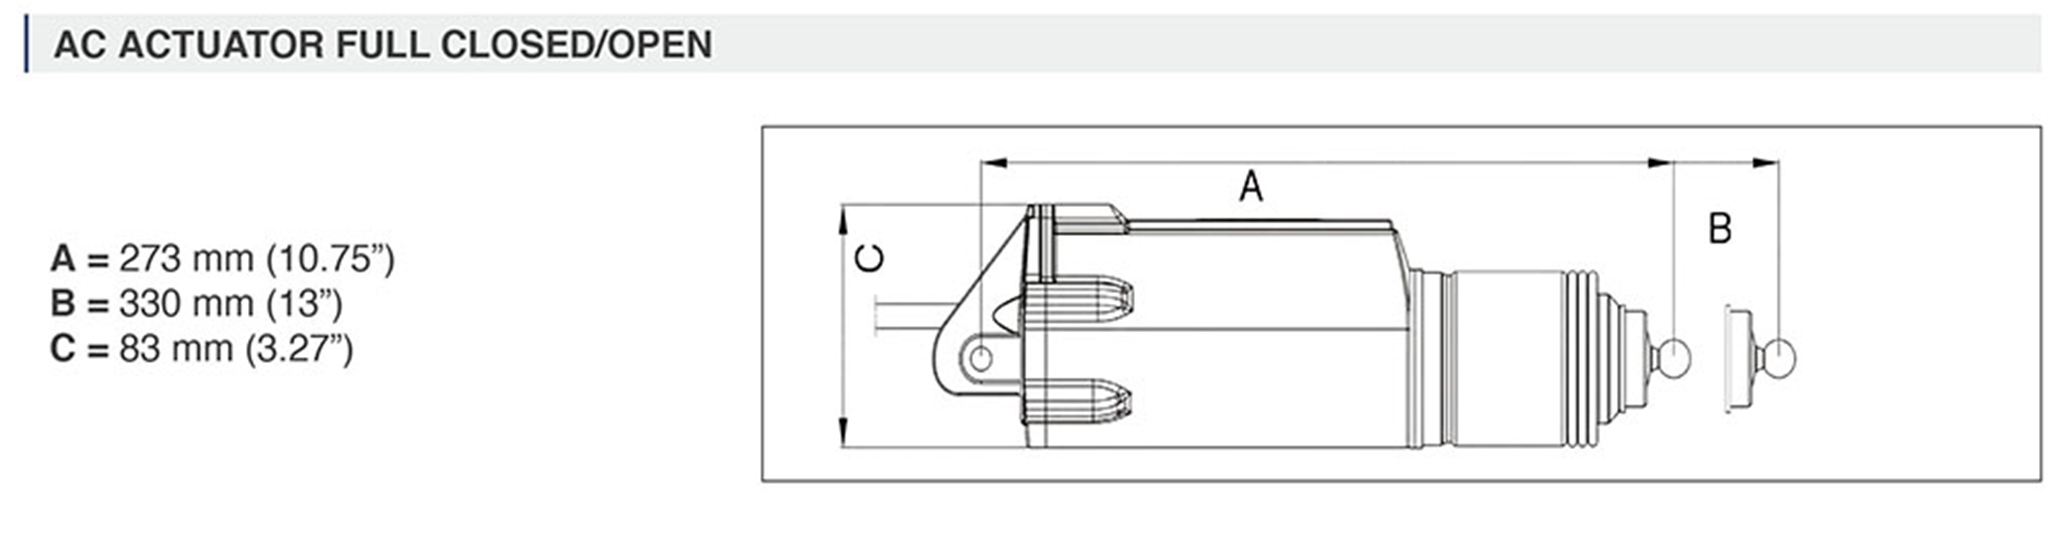 AC12 Compact Trim Tab Actuator and Brackets Specifications